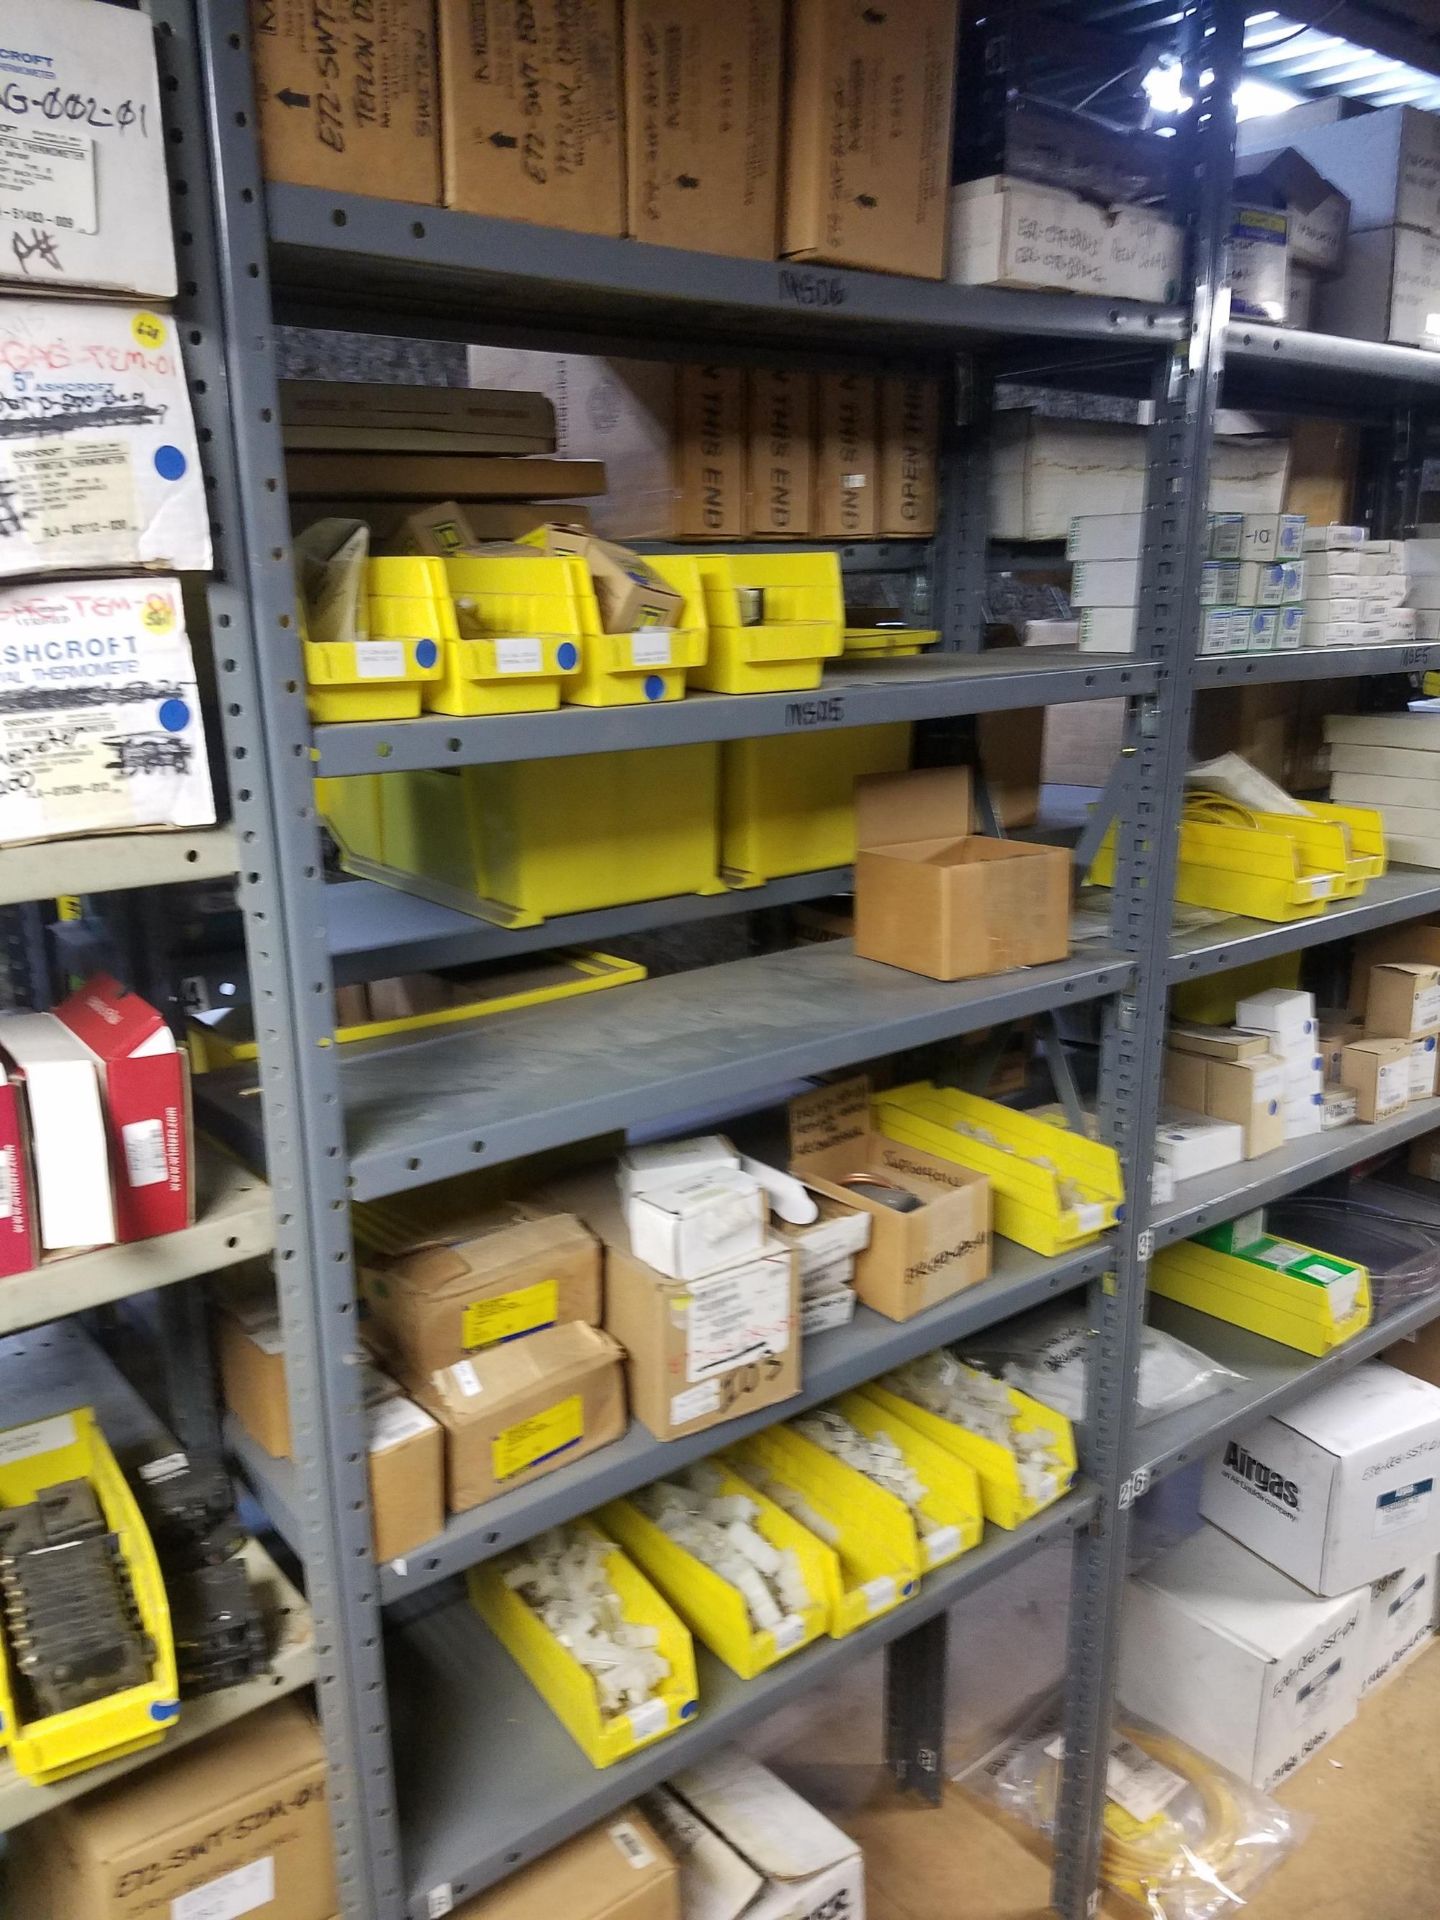 Contents of Spare Parts Storage Area On Mezzanine | Rig Fee: $400 - Image 16 of 19